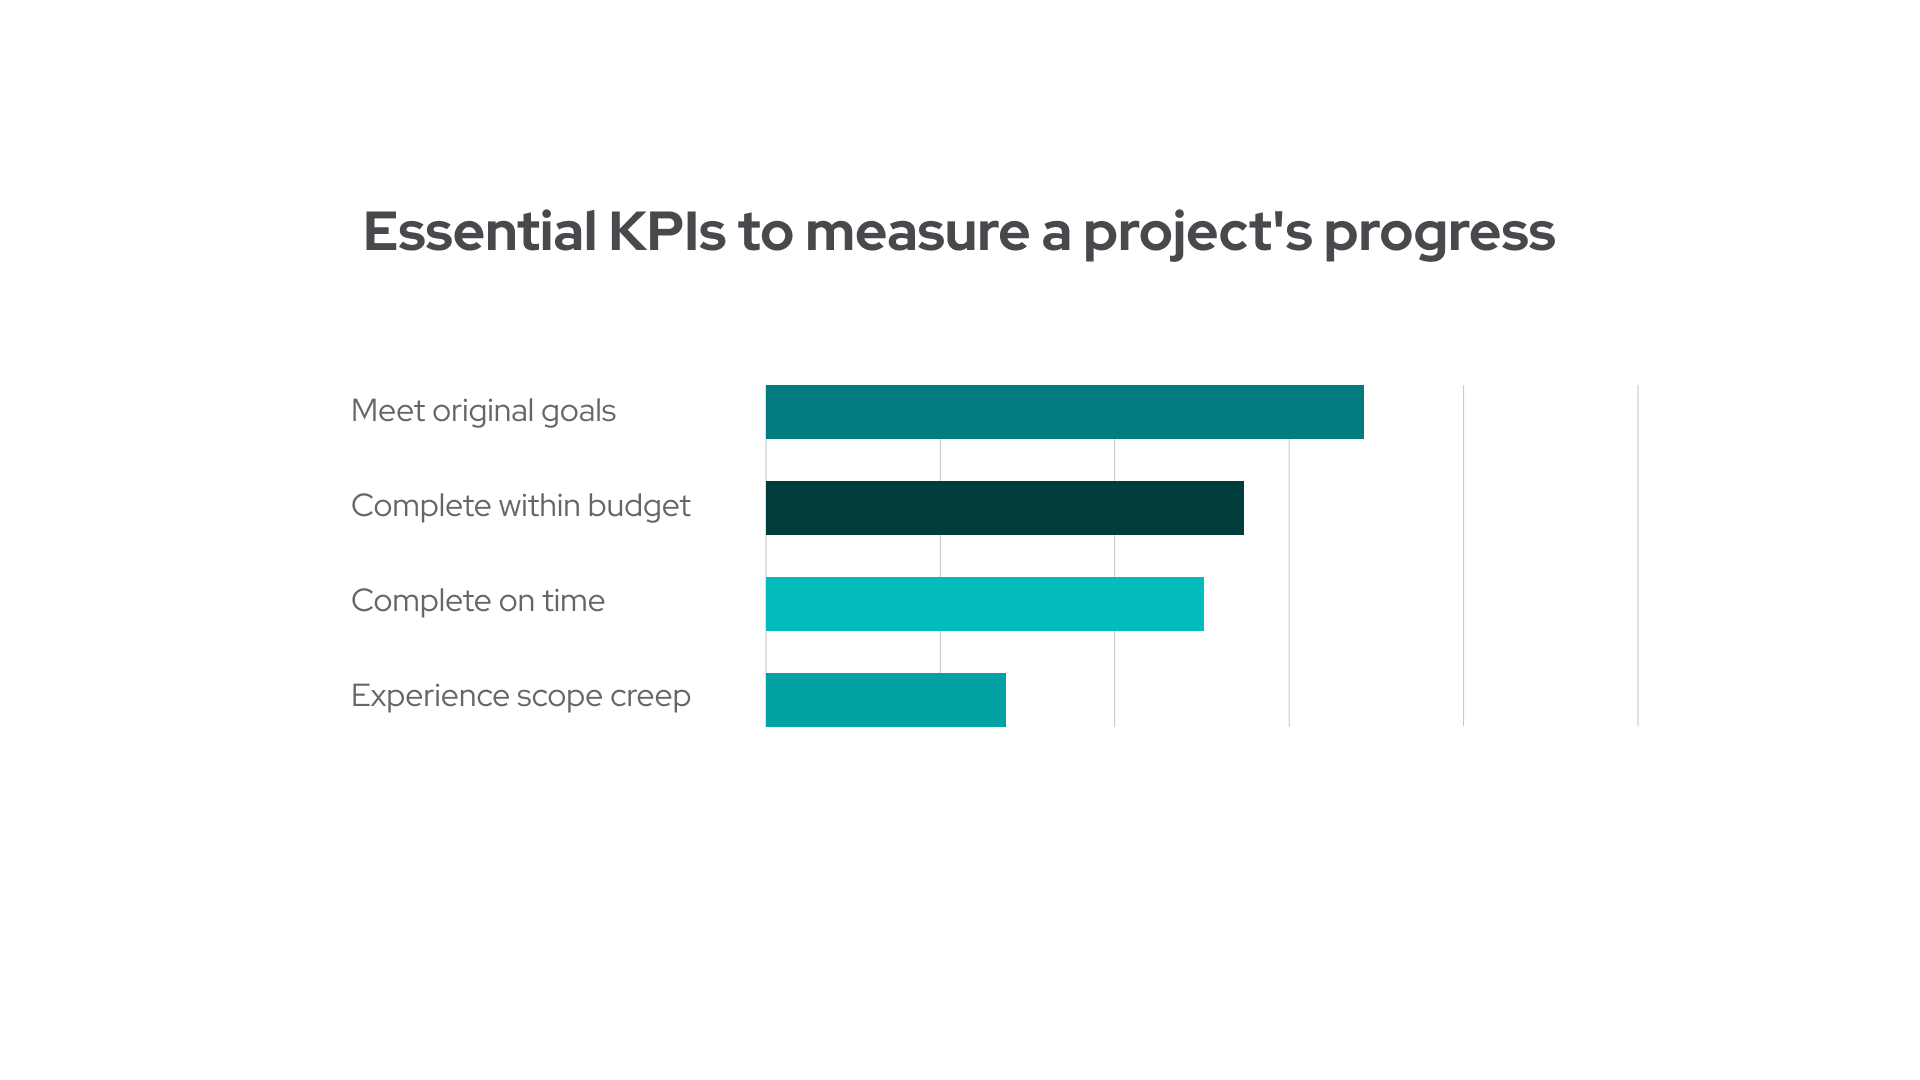 When it comes to checking programmers' performance, the major KPIs for production and development are meeting original goals and completing within budget.